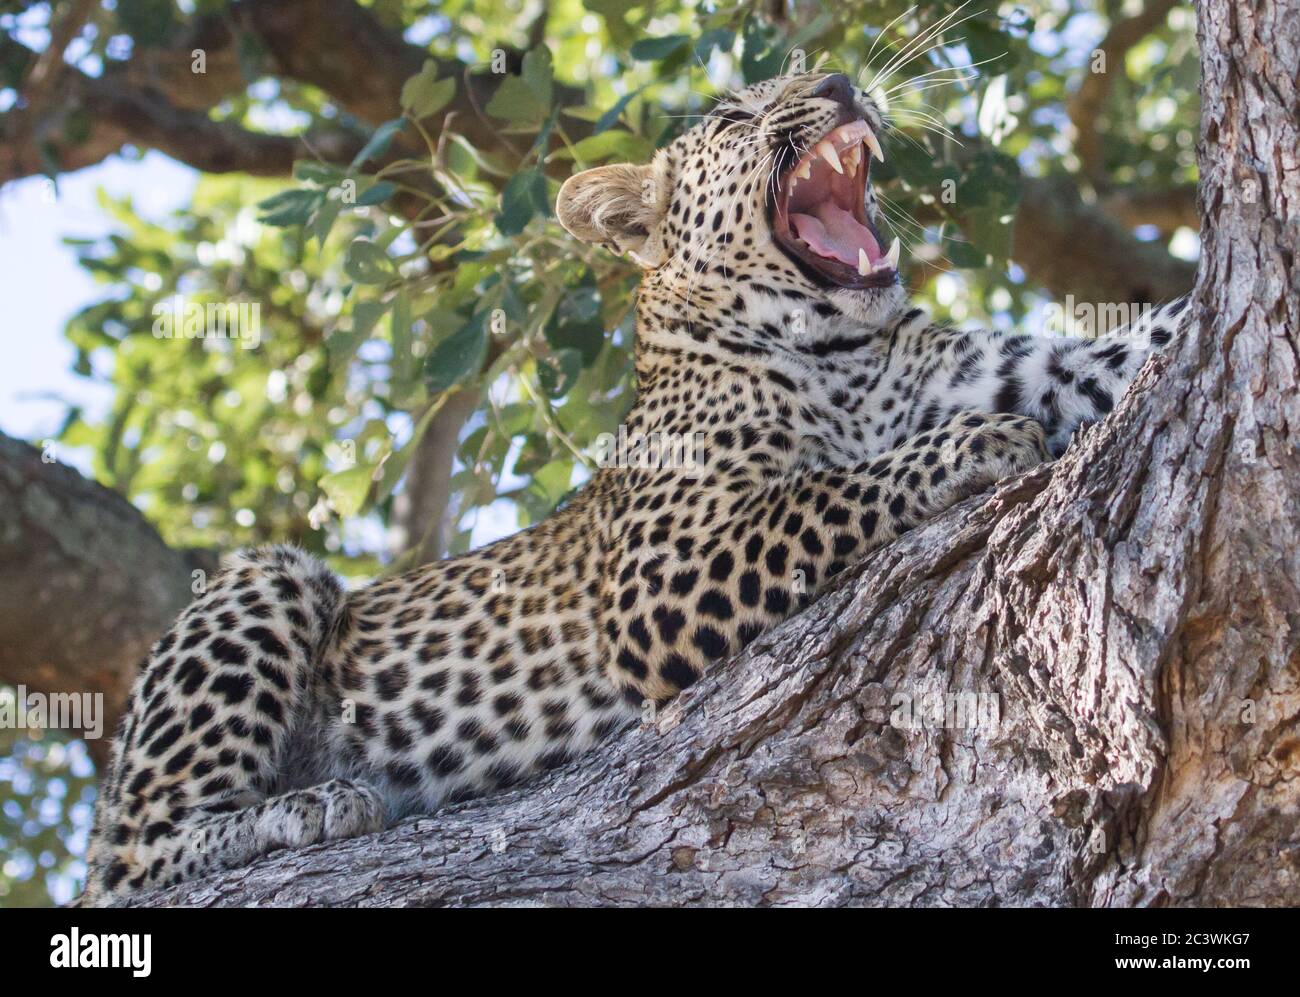 A majestic leopard (Panthera pardus) in a tree, yawning and showing his razor sharp teeth Stock Photo